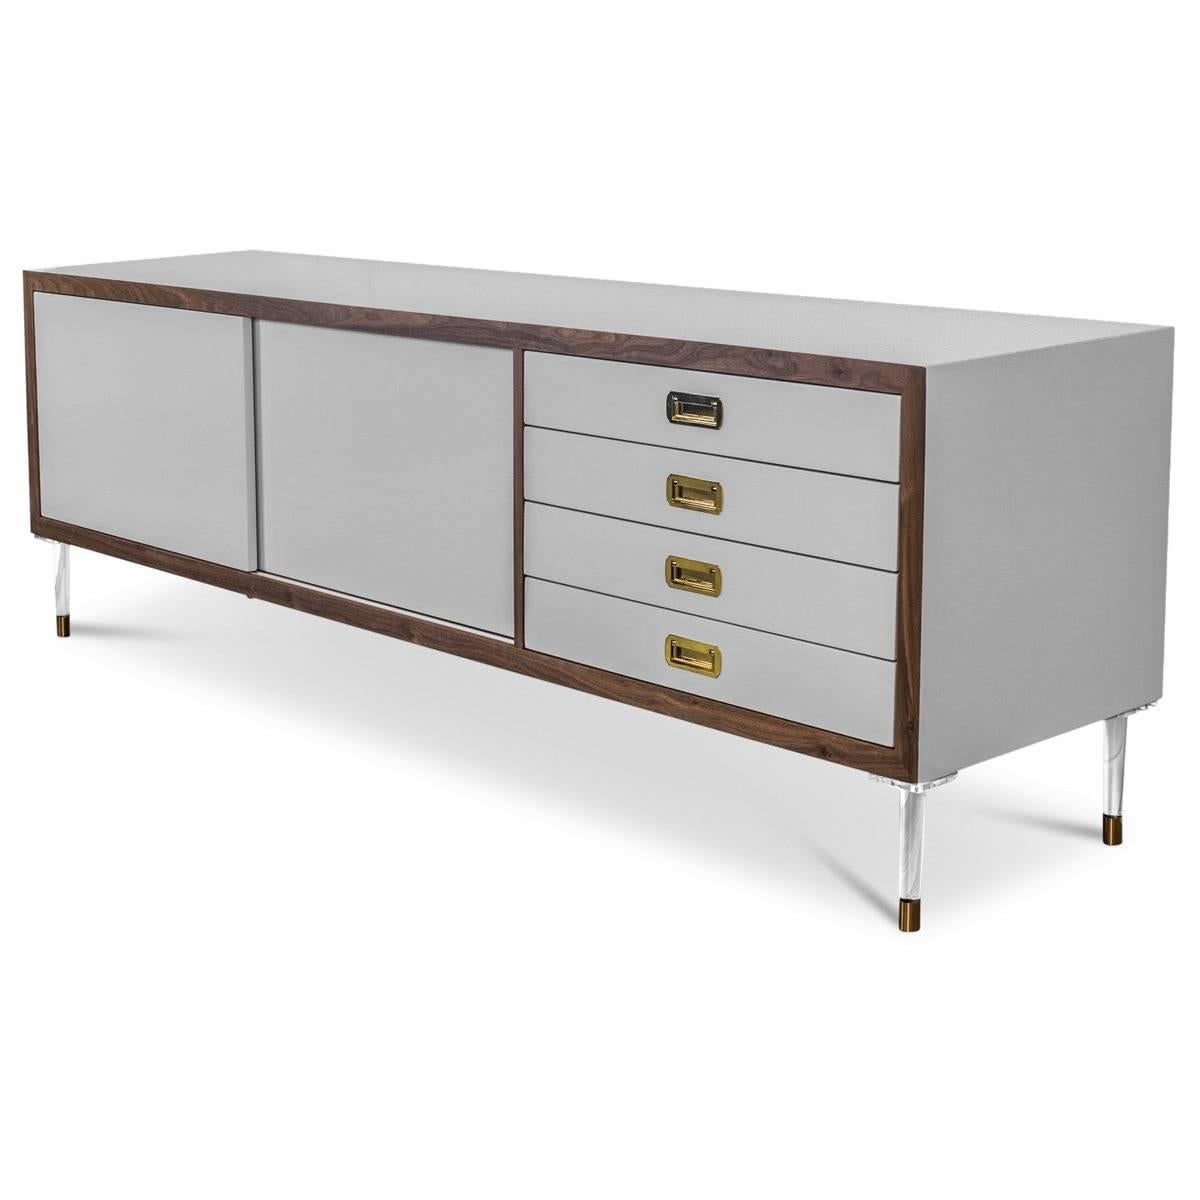 Introducing our new St. Martin Credenza featuring two sliding doors and four drawers to maximize its functionality while still being stylish and chic. This retro-modern design features an oiled walnut trim, brass hardware, our famous Greystone